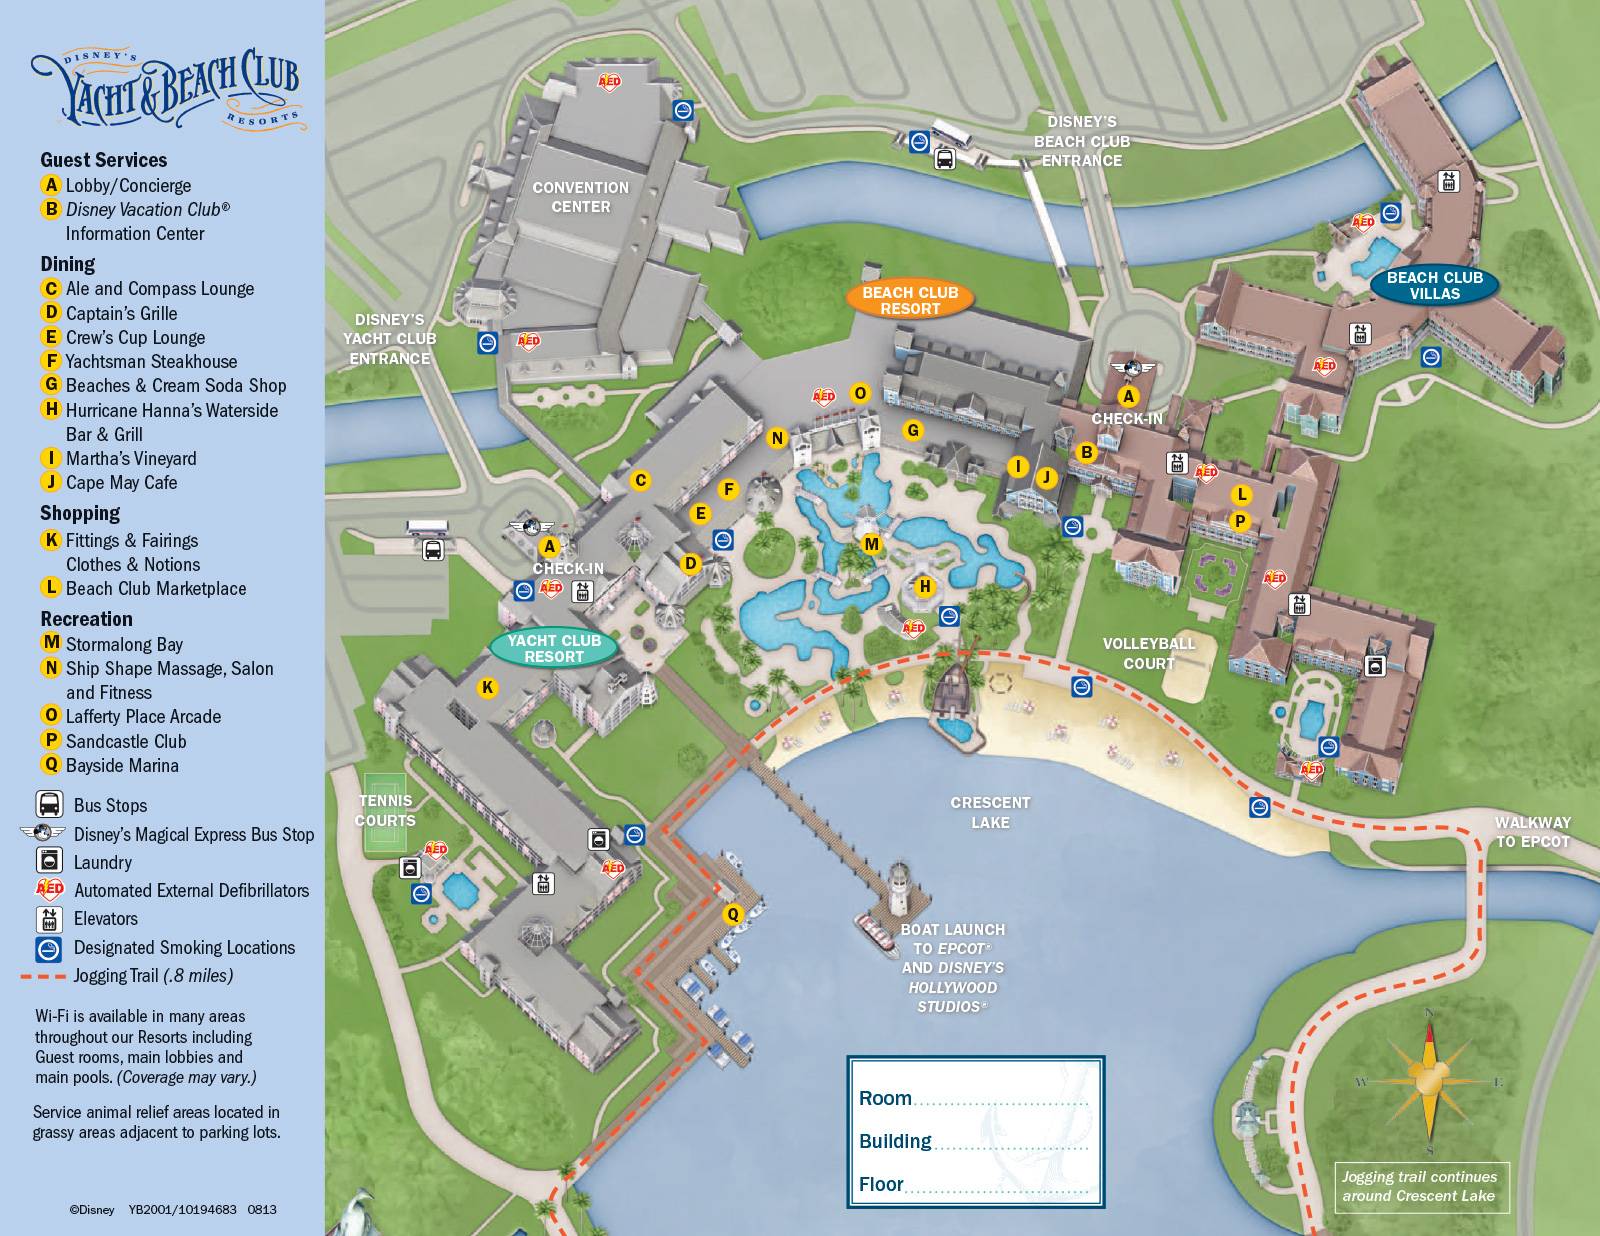 New 2013 Yacht and Beach Club map